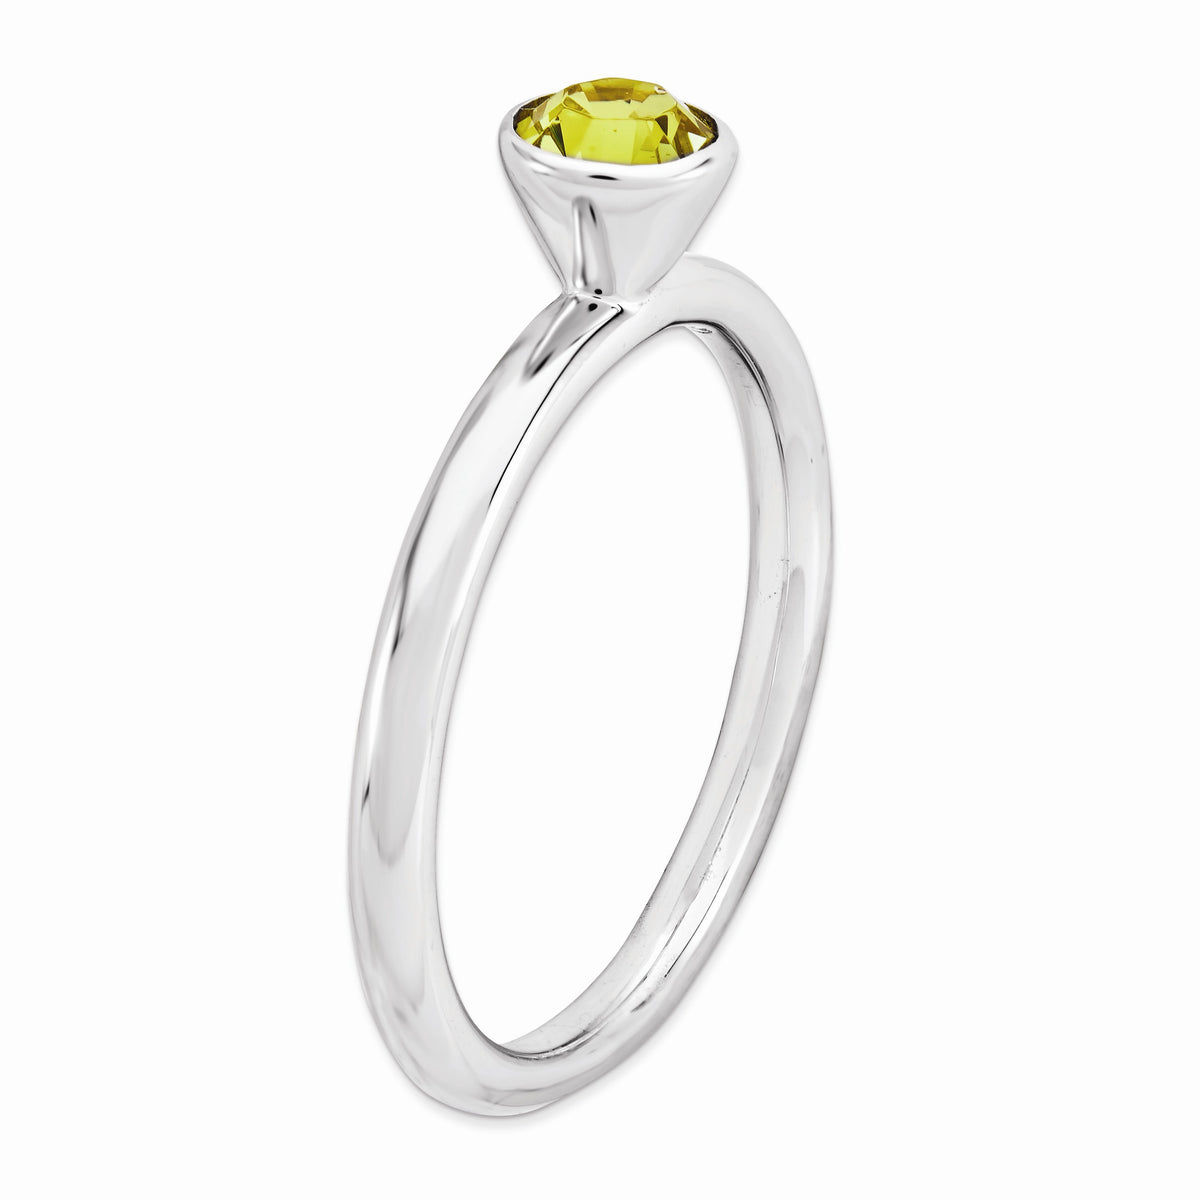 Alternate view of the 5mm High Profile Sterling Silver with Yellow Crystals Stack Ring by The Black Bow Jewelry Co.